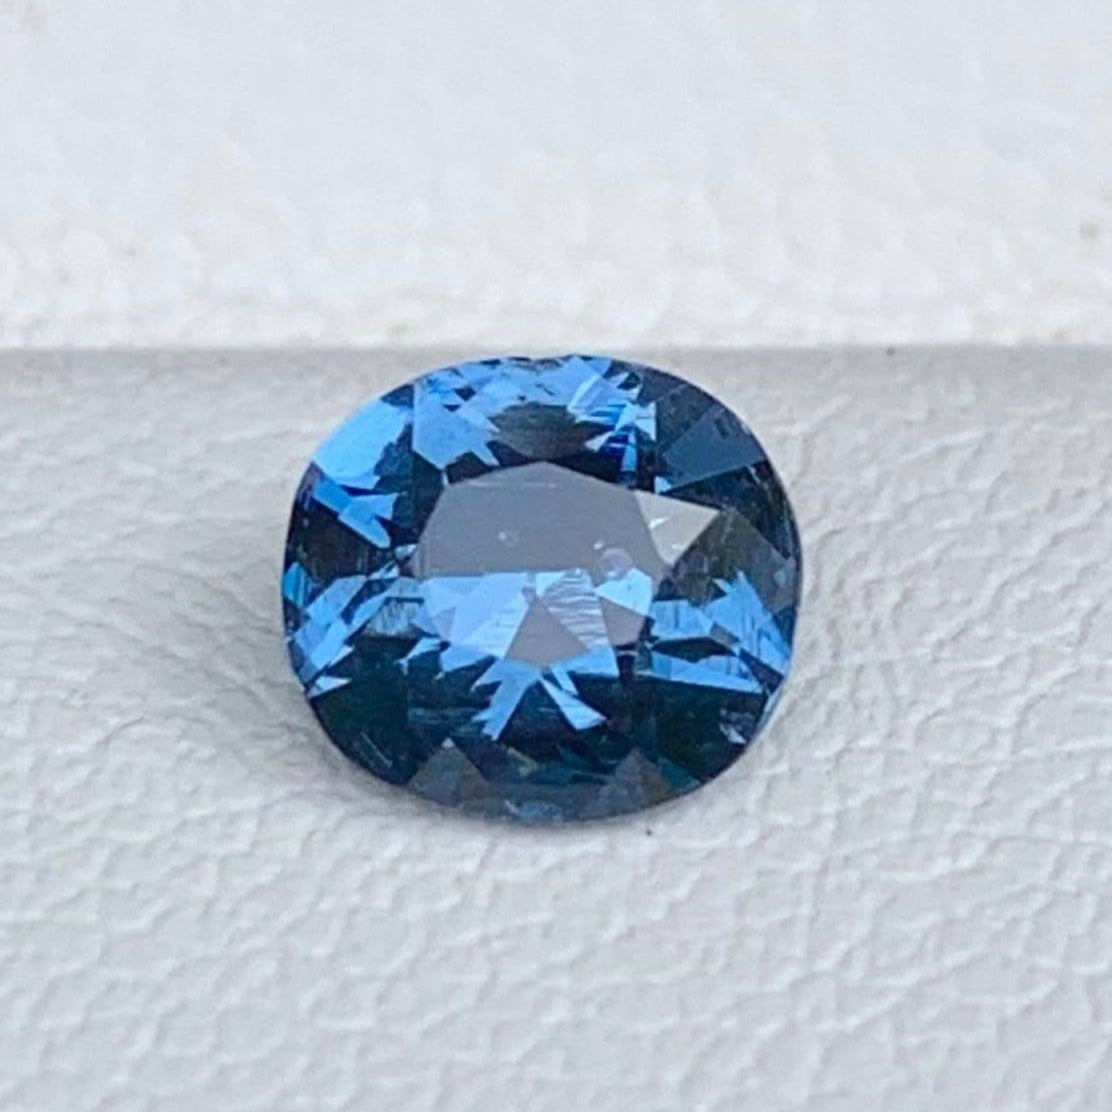 RARE Spinel 0.84 Carats , Cobalt Spinal , Unheated Blue Spinal , Natural Spinal Gemstone - Baza Boutique 